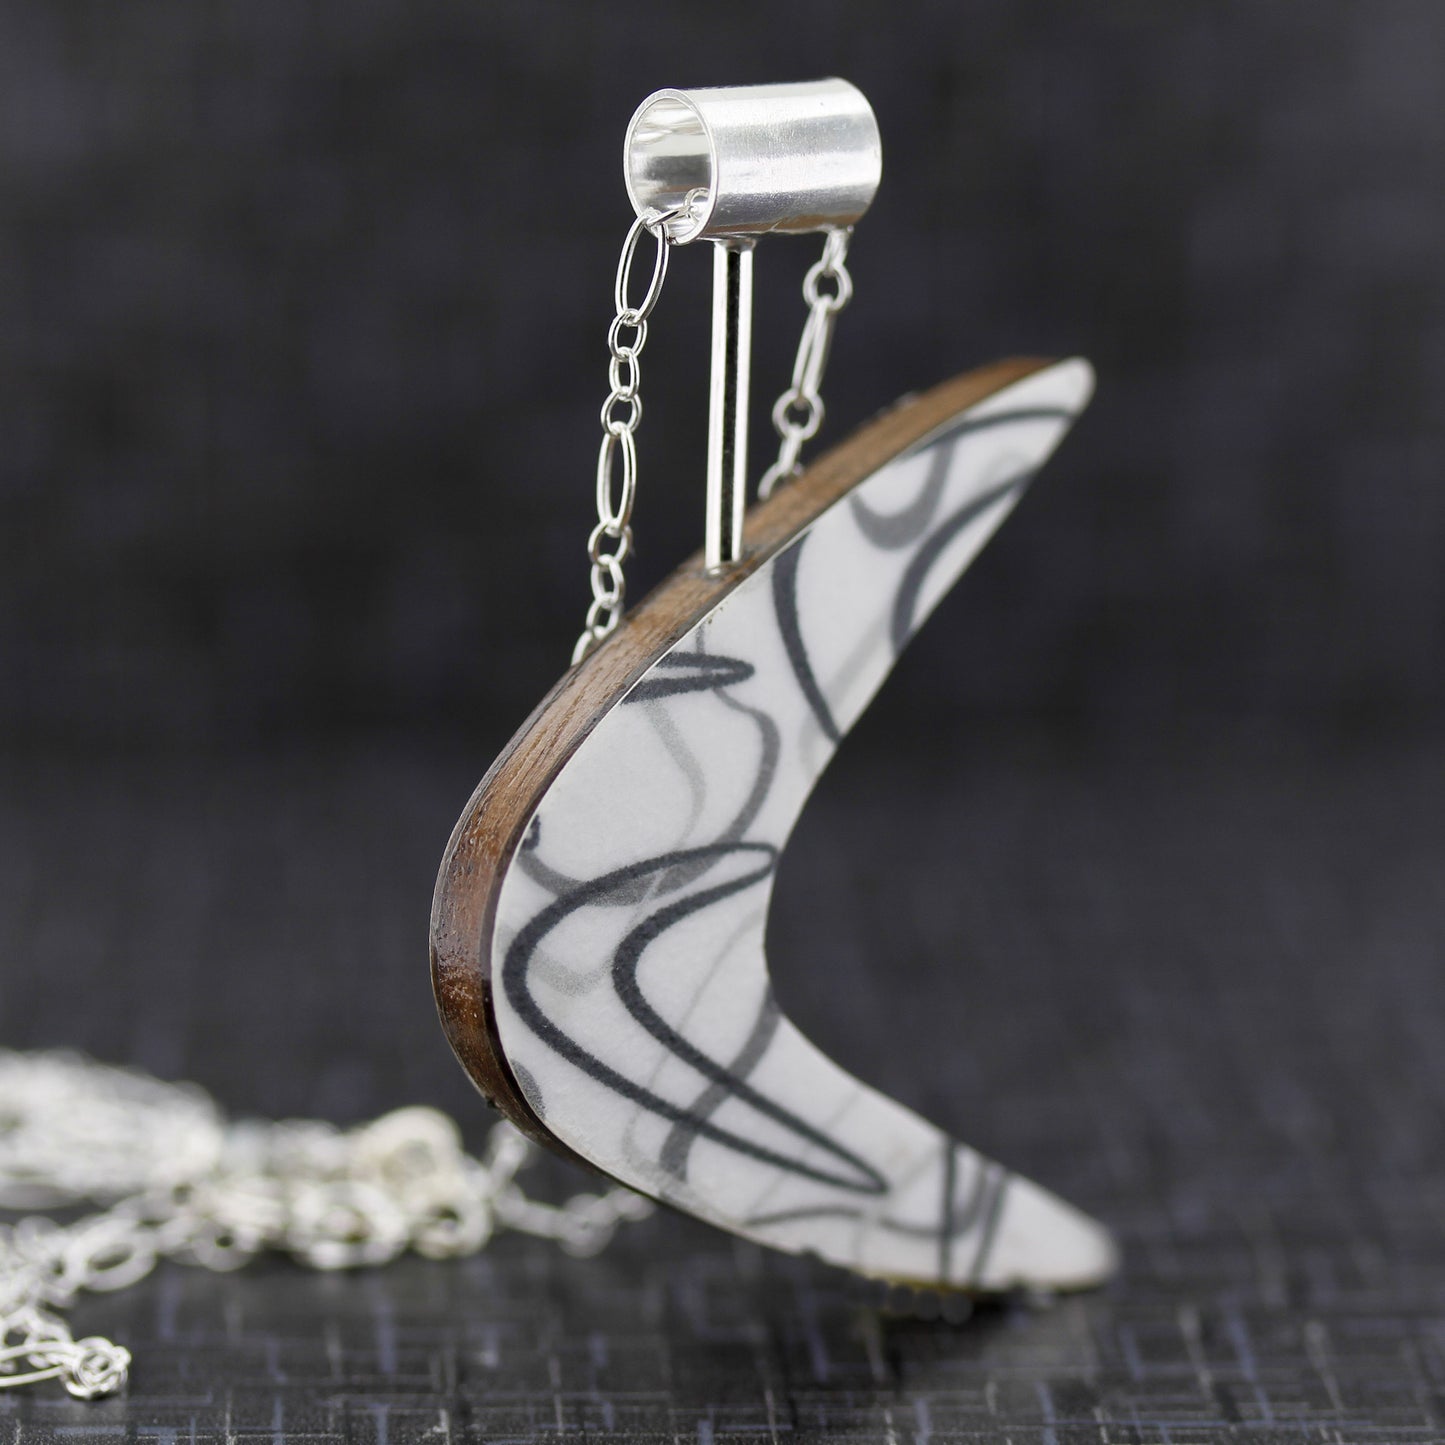 Boomerang shaped laminate on wood necklace inspired by mid century modern art and design.